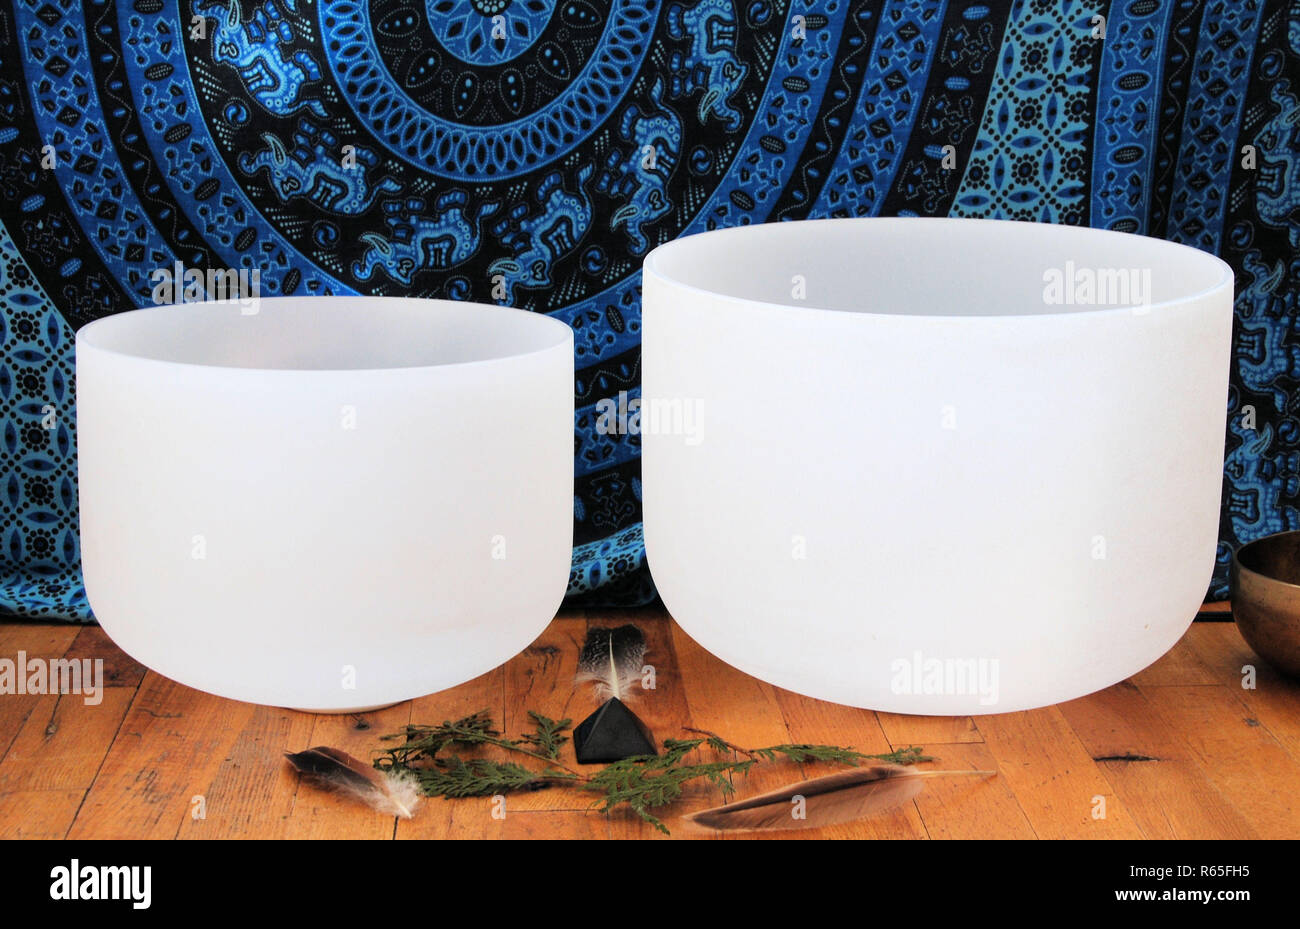 Two white crystal singing bowl on a wooden floor with an altar and a blue Indian type of linen decoration in the background Stock Photo